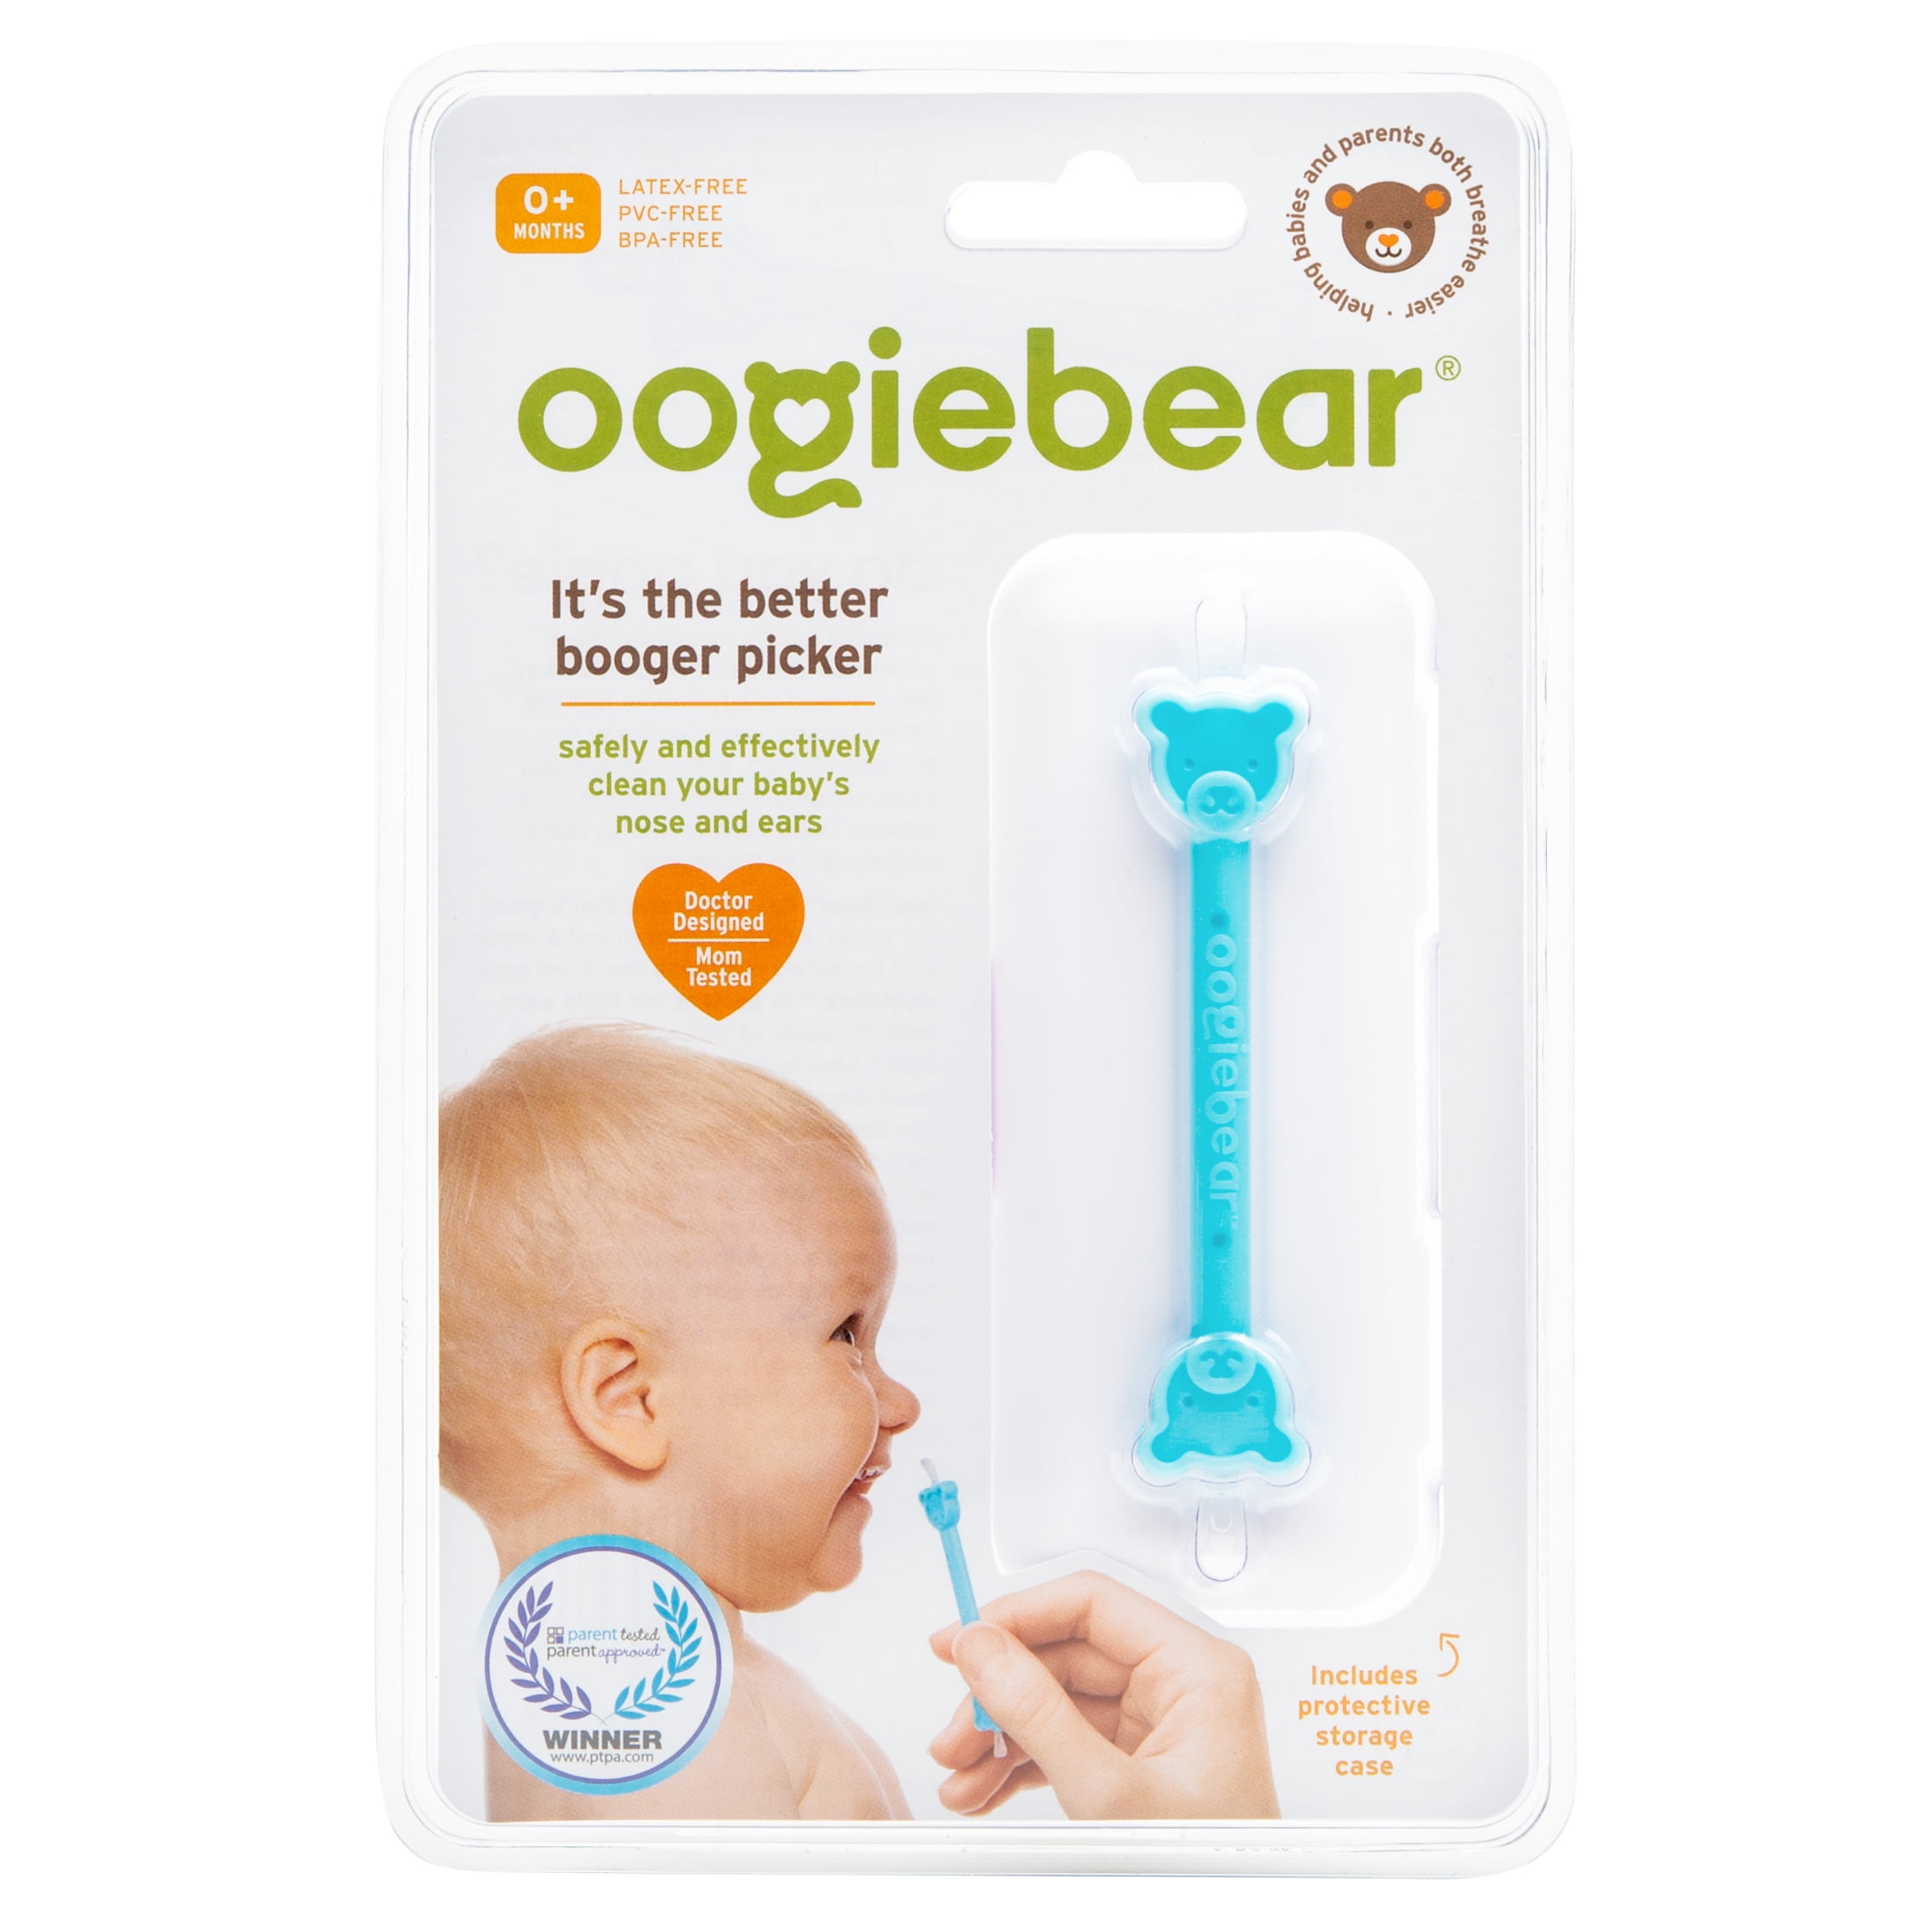 Oogiebear Brite Baby Ear and Nose Cleaner - The Parenting Emporium